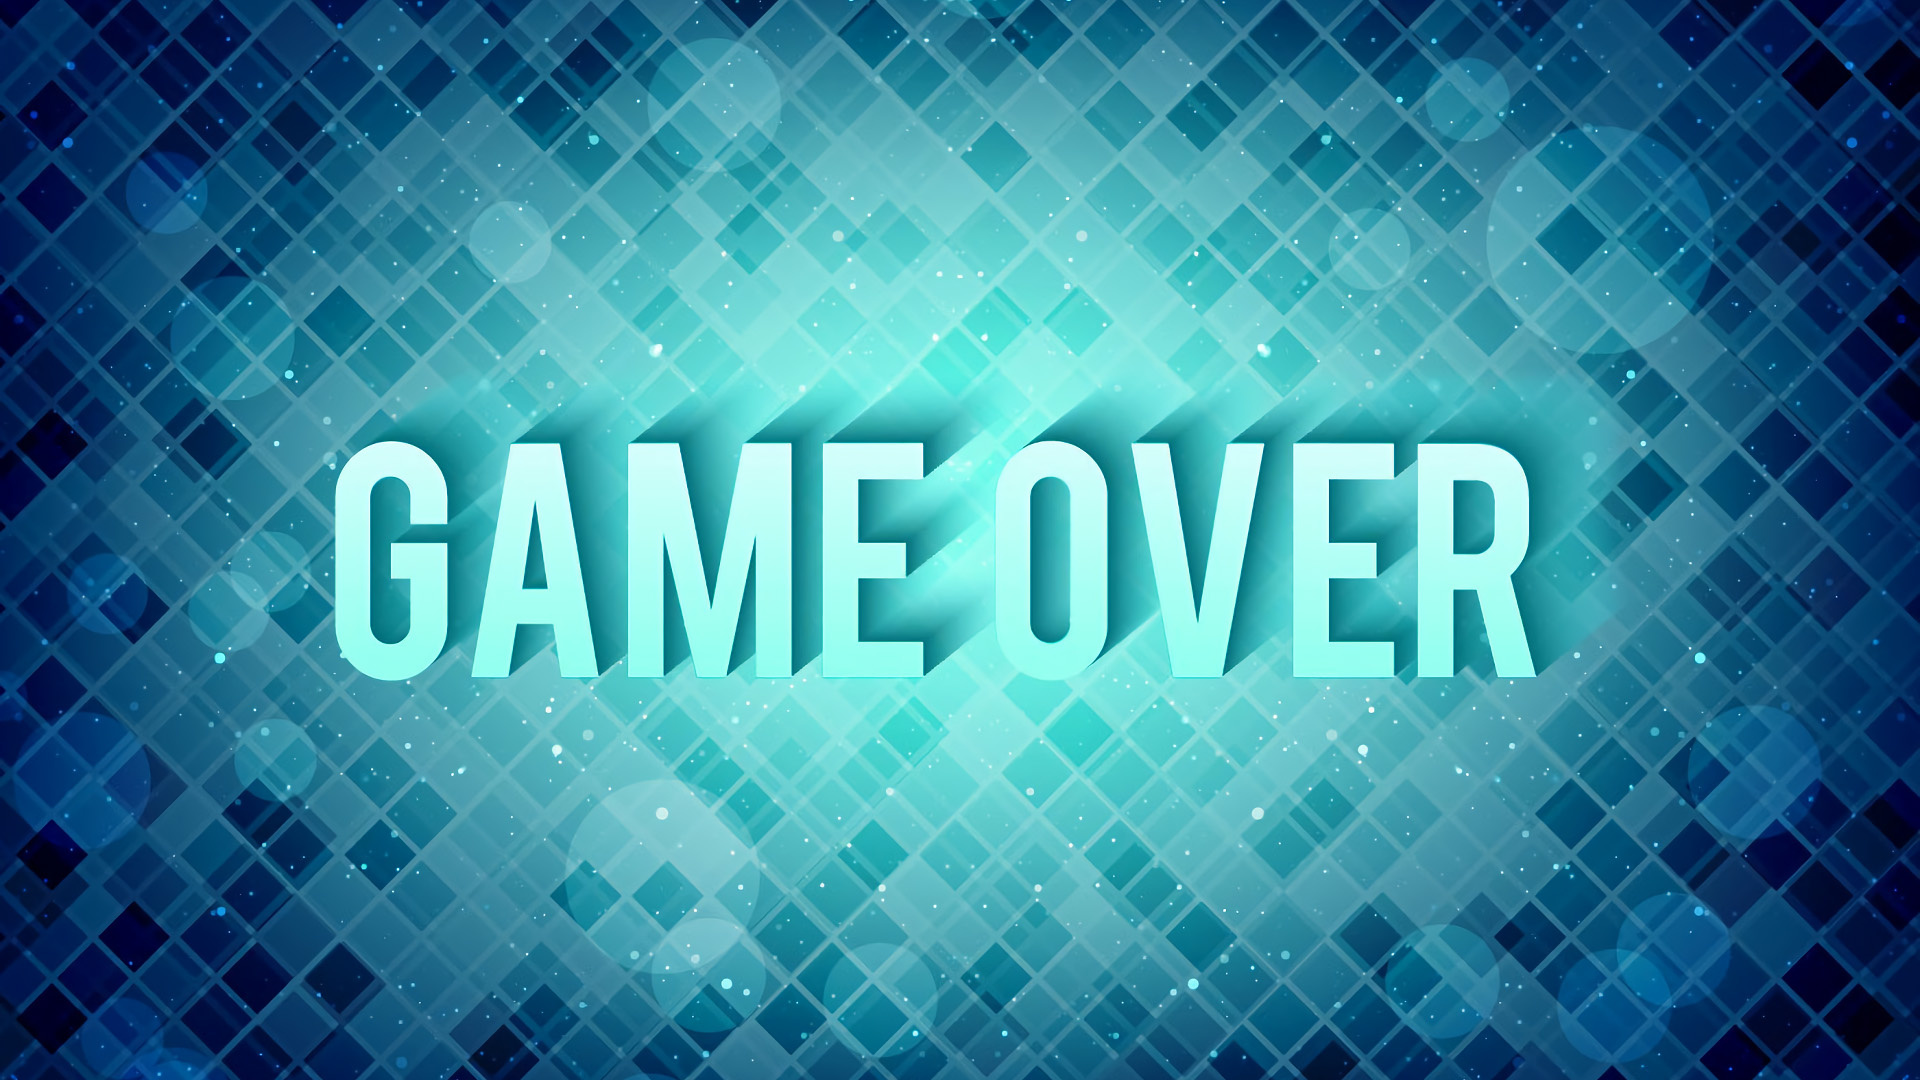 Game Over, Blue theme, High definition, Vibrant colors, 1920x1080 Full HD Desktop